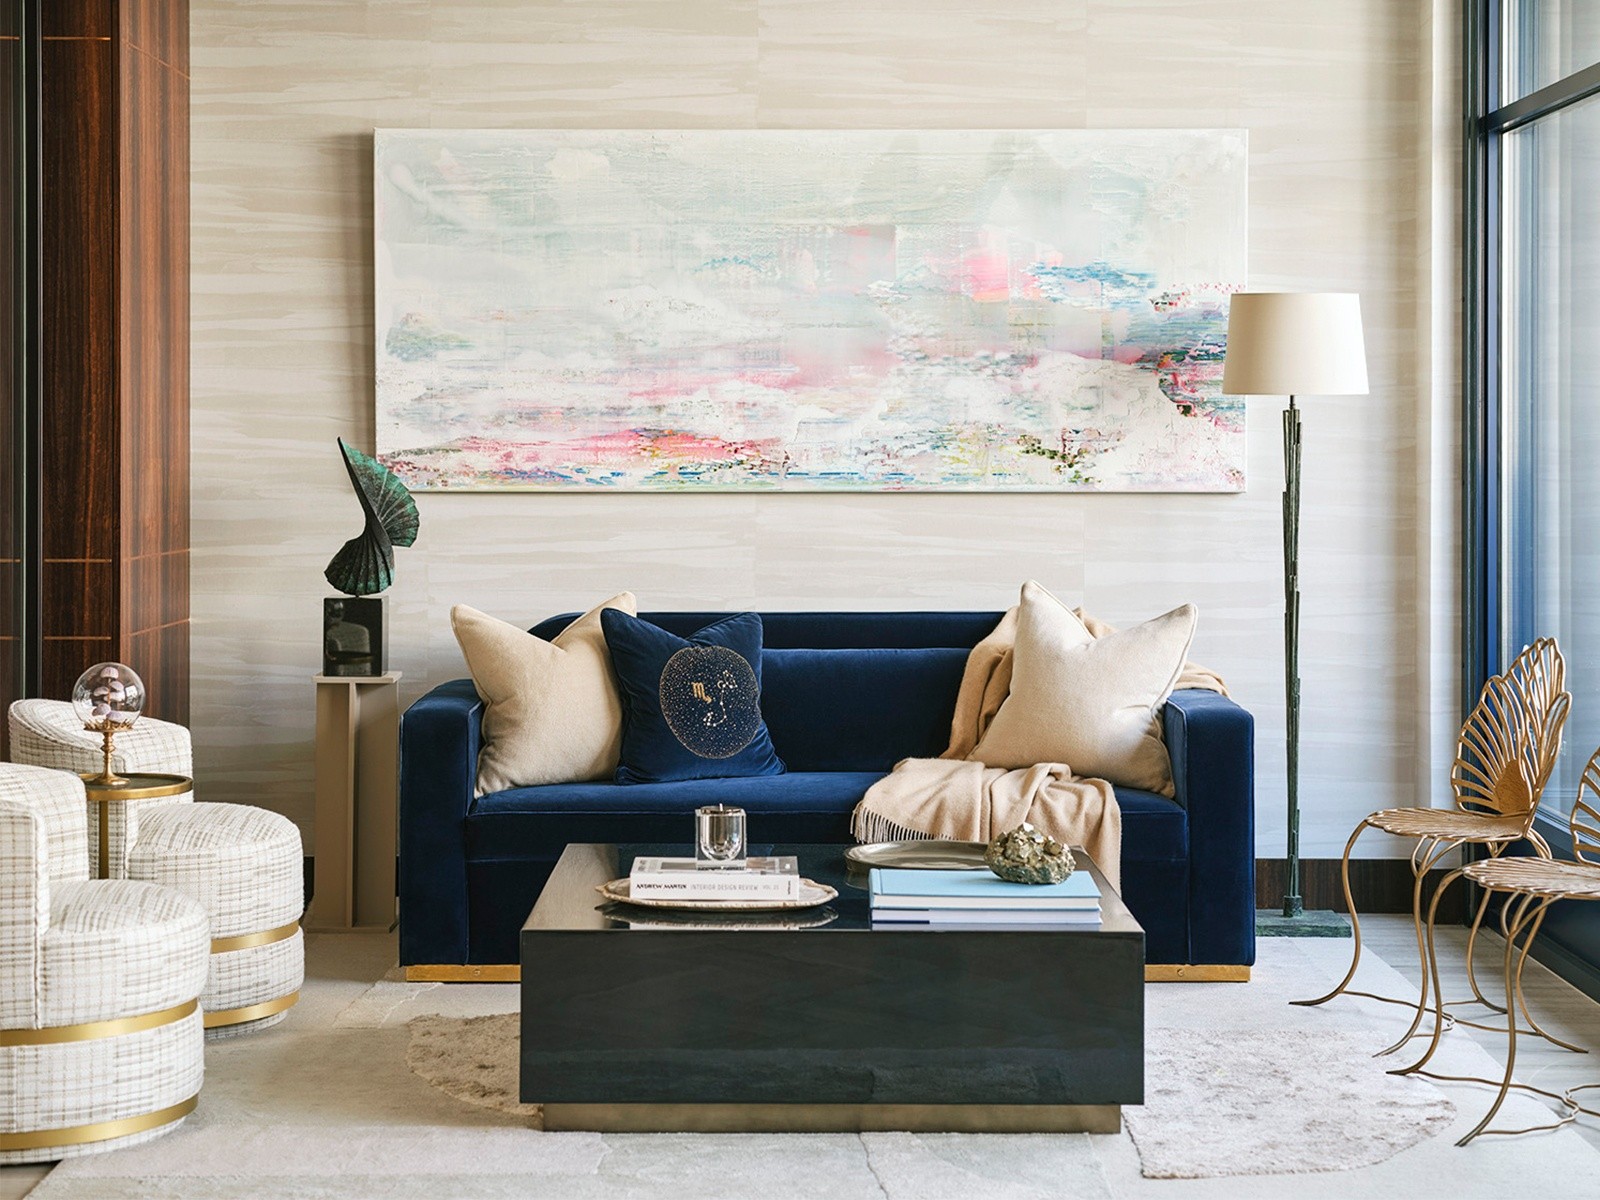 How to Choose Artwork for Your Home